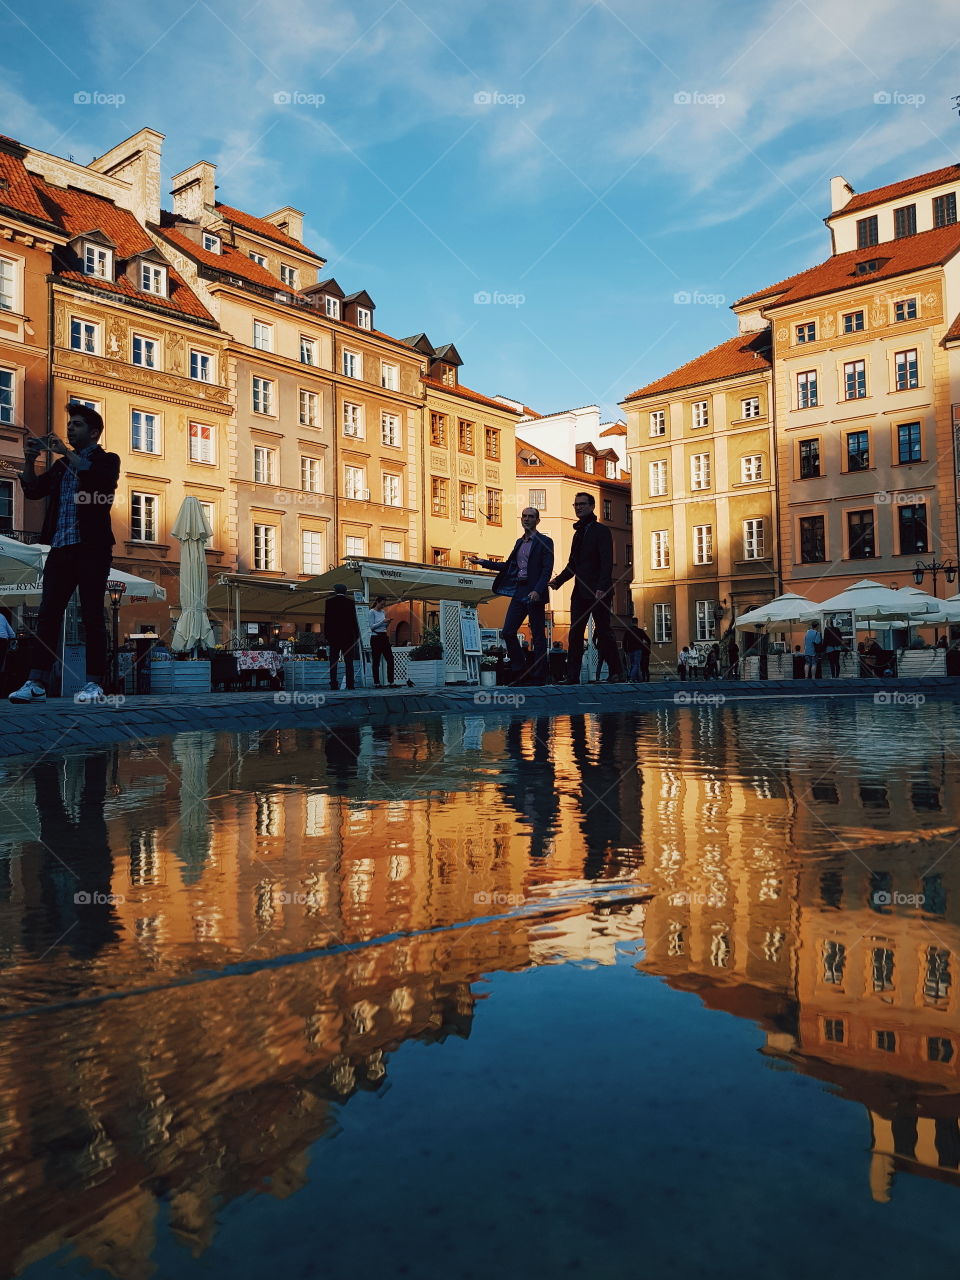 Reflection of the old market square in Warsaw with silhouettes of people passing.